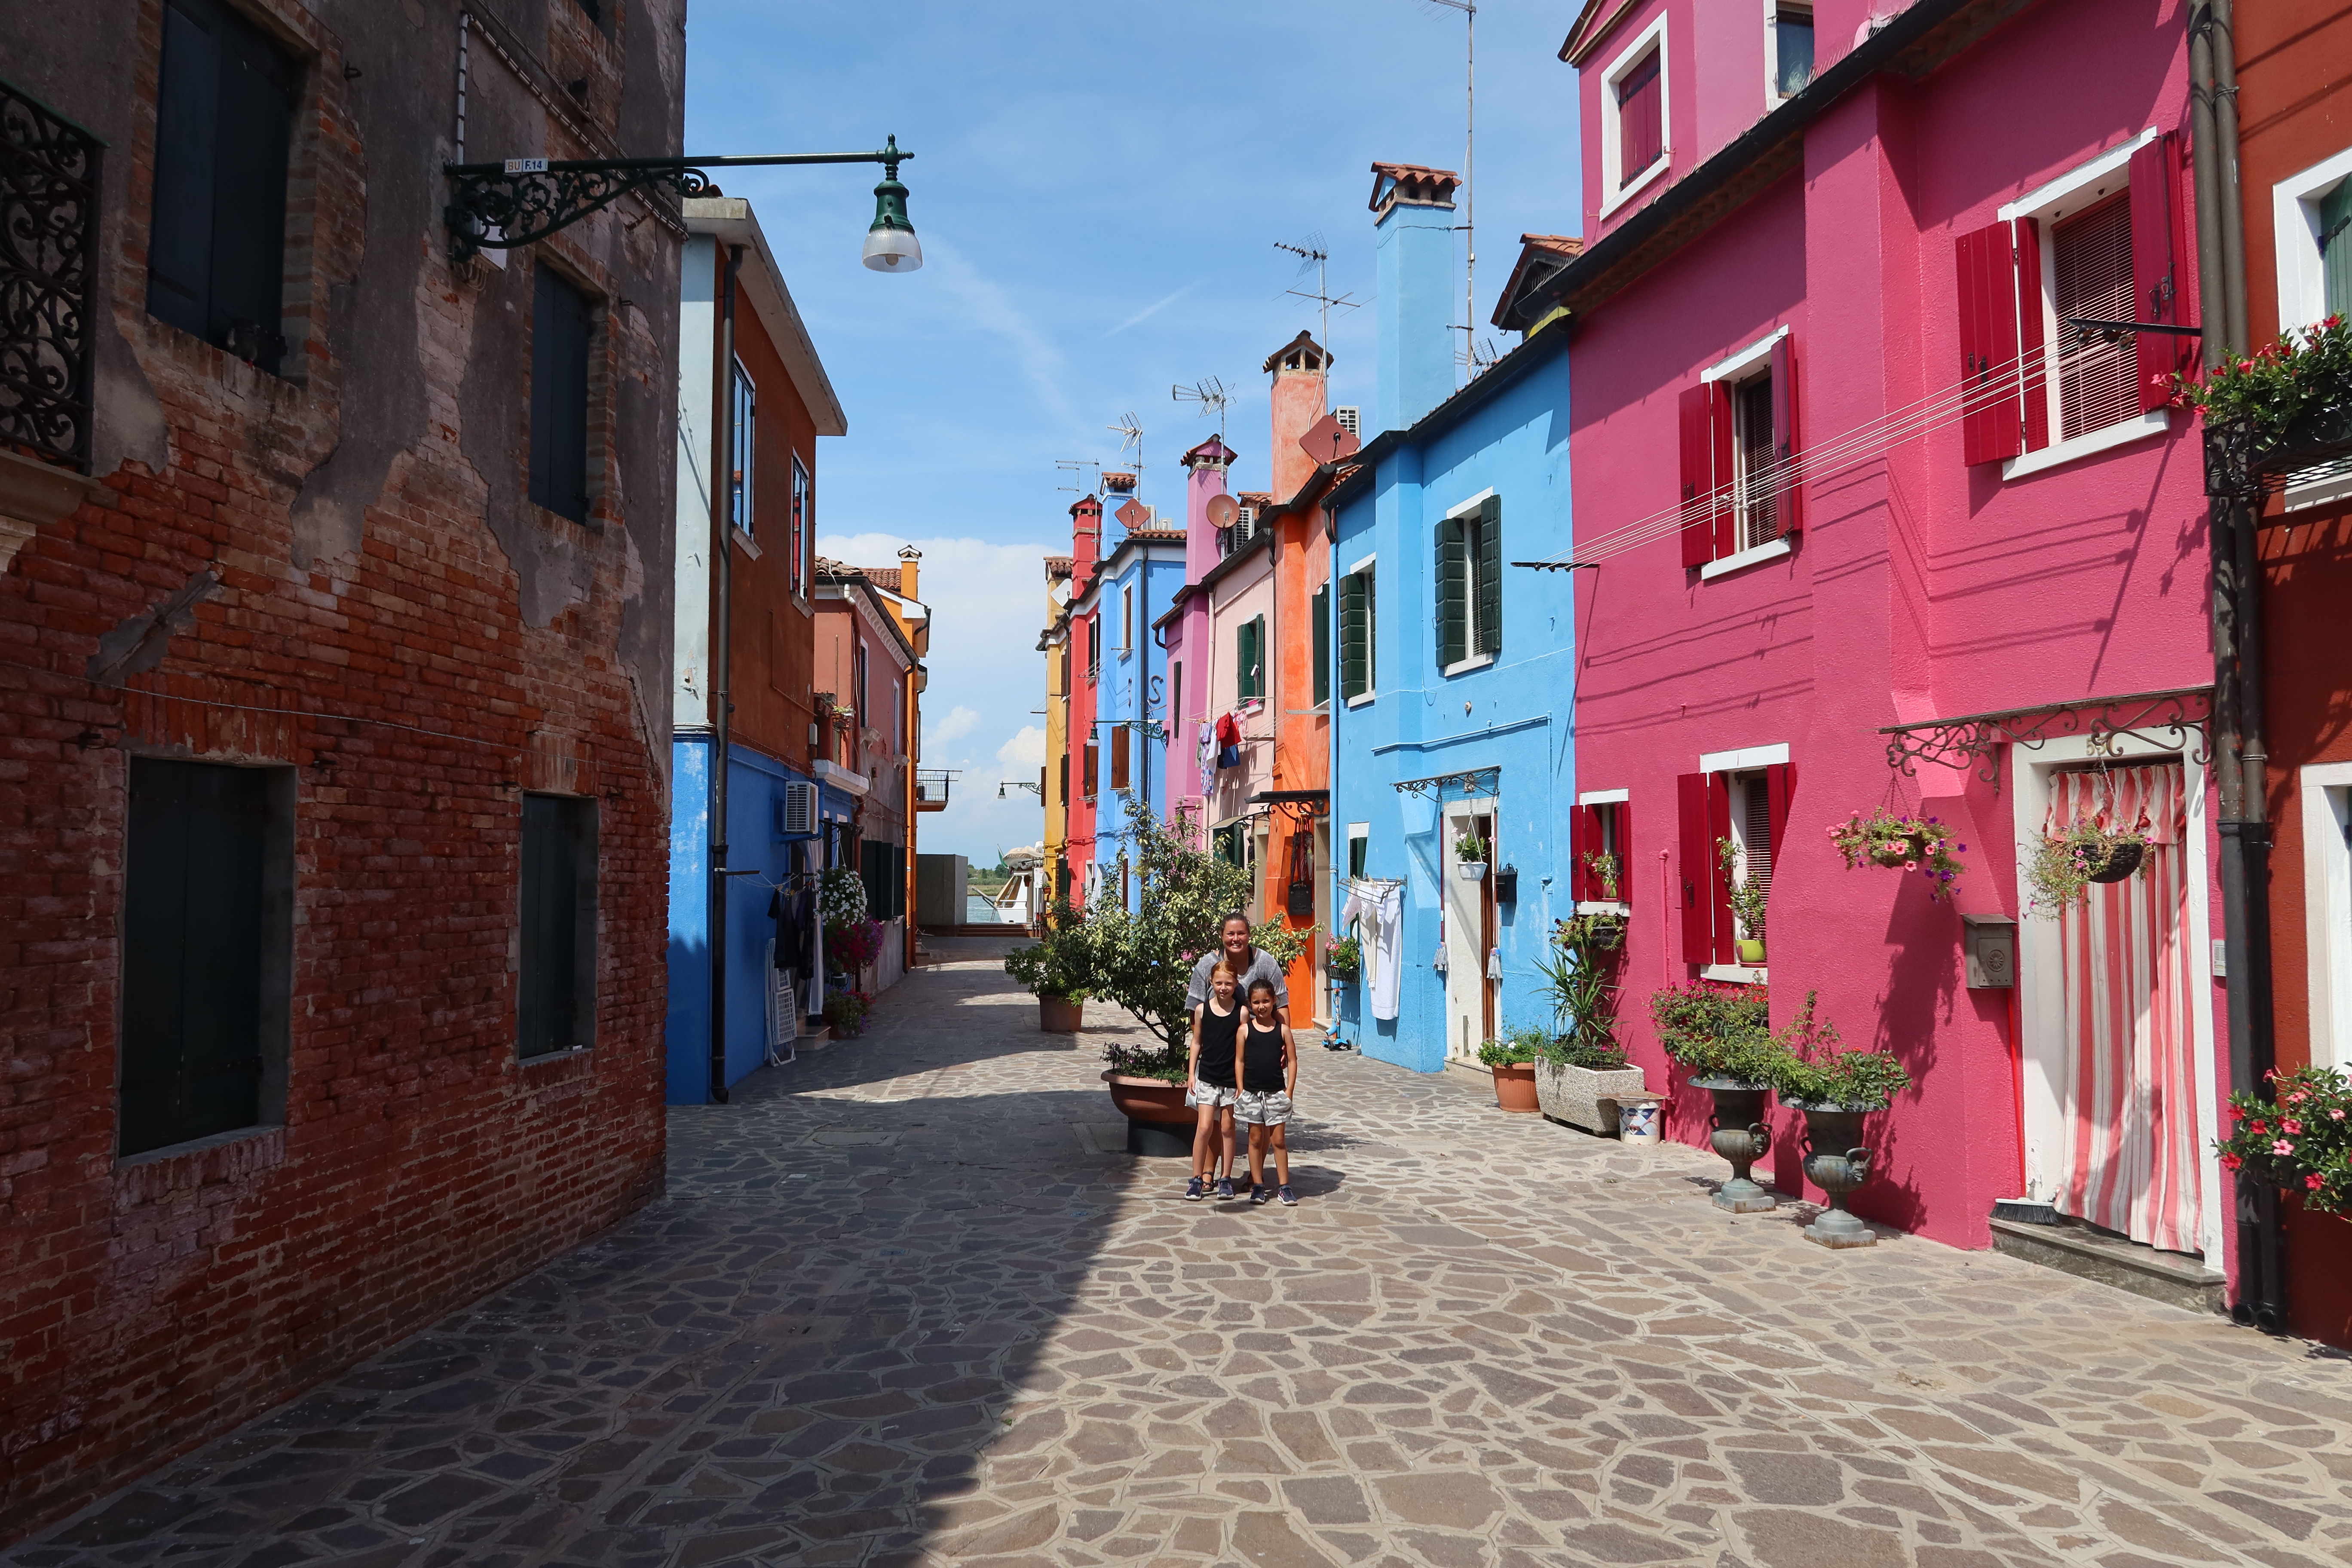 Burano Colored Houes 2 - One Weekend in Venice with Kids